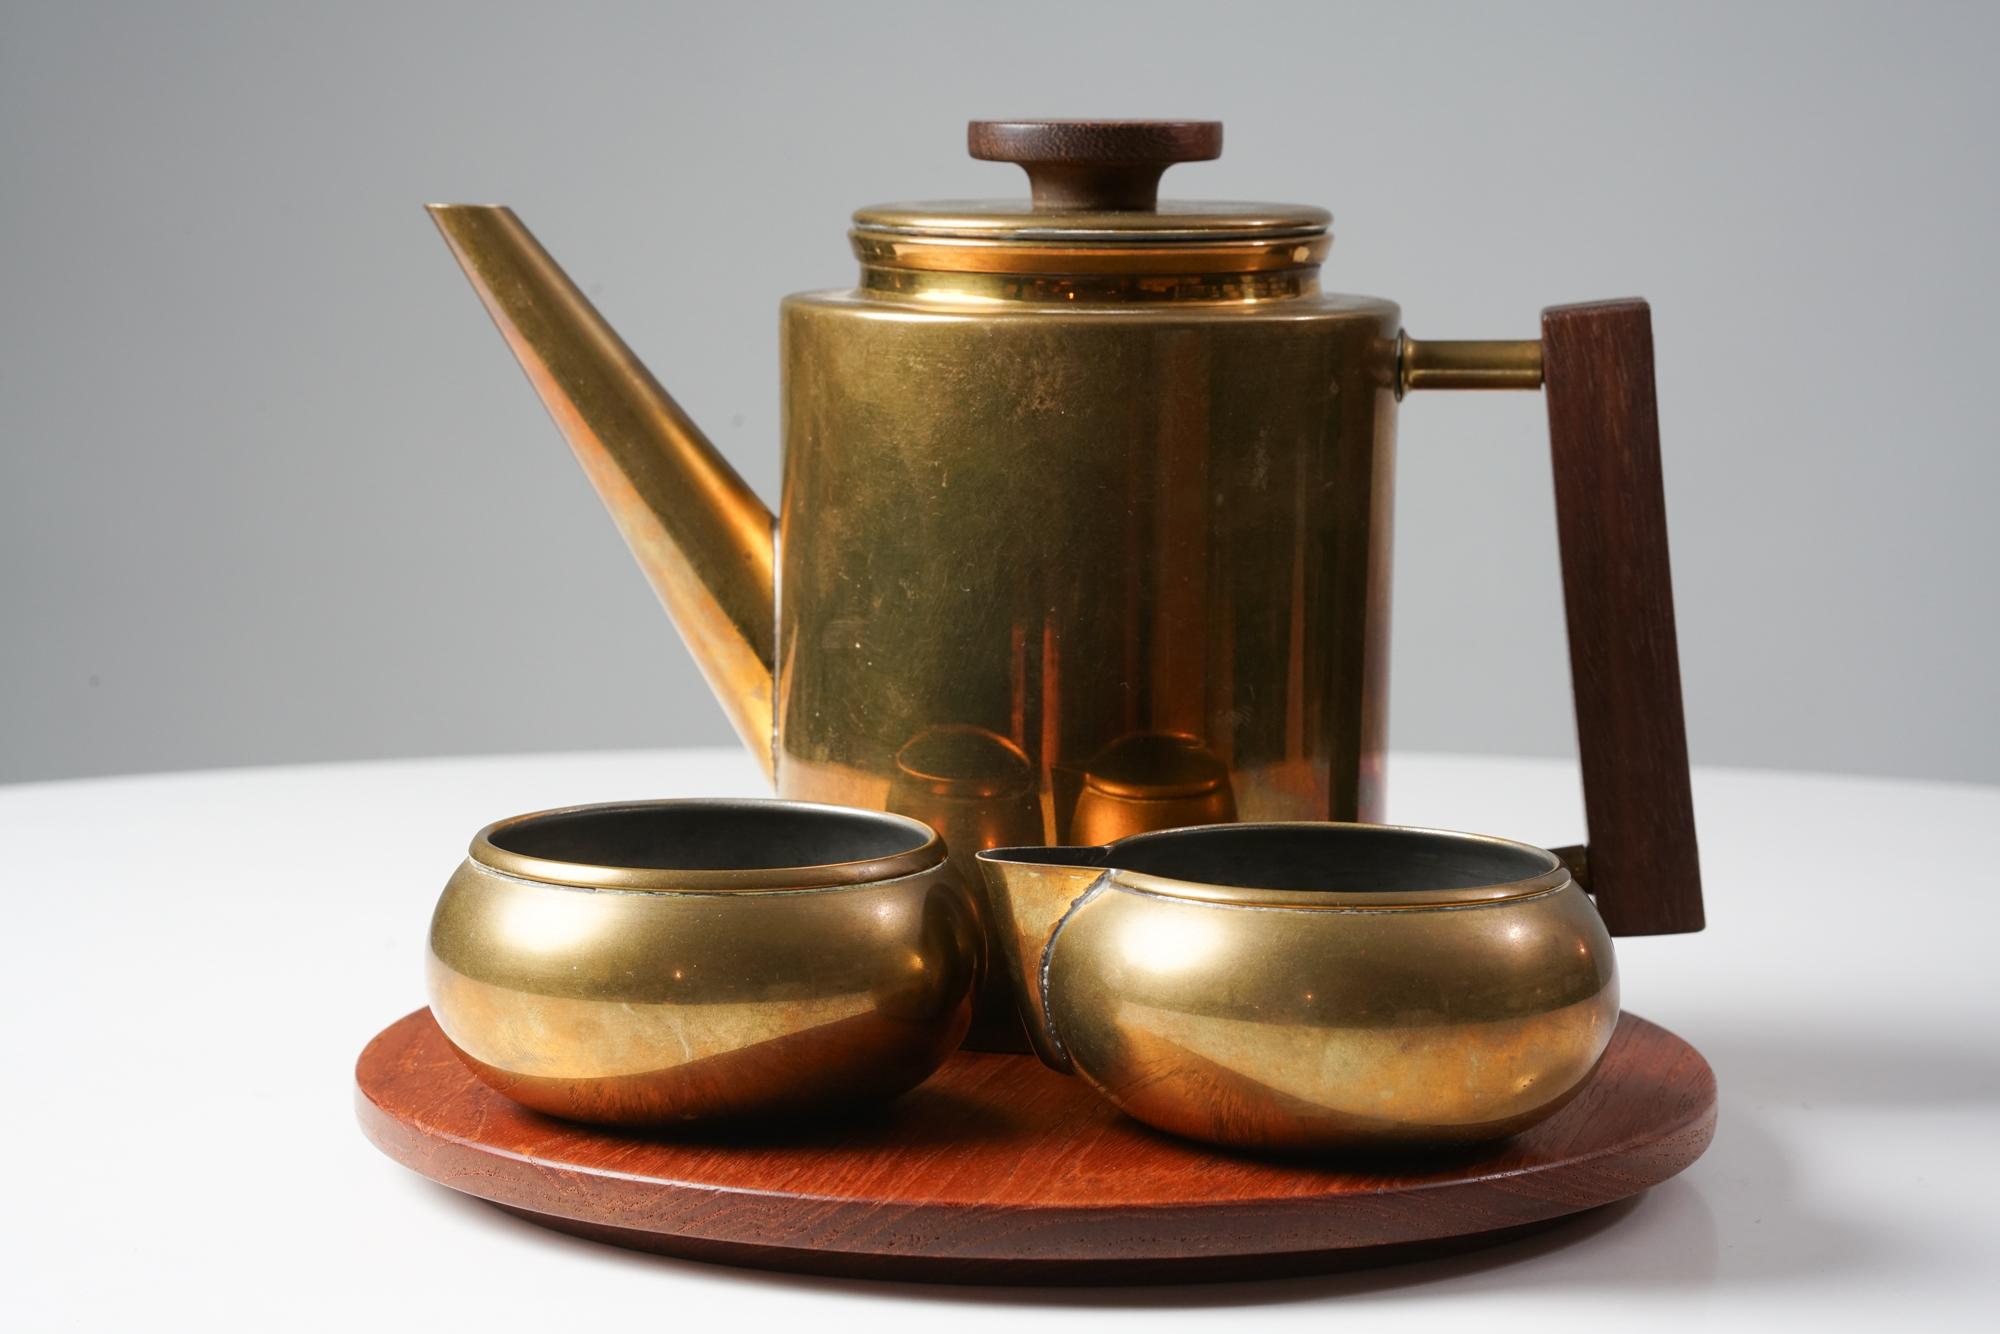 Coffee set designed by Maija Heikinheimo for Artek, 1960s. Brass and teak. The set included a coffee pot, cream pitcher, sugar container and a teak serving tray. Marked. Good vintage condition, minor patina and wear consistent with age and use.